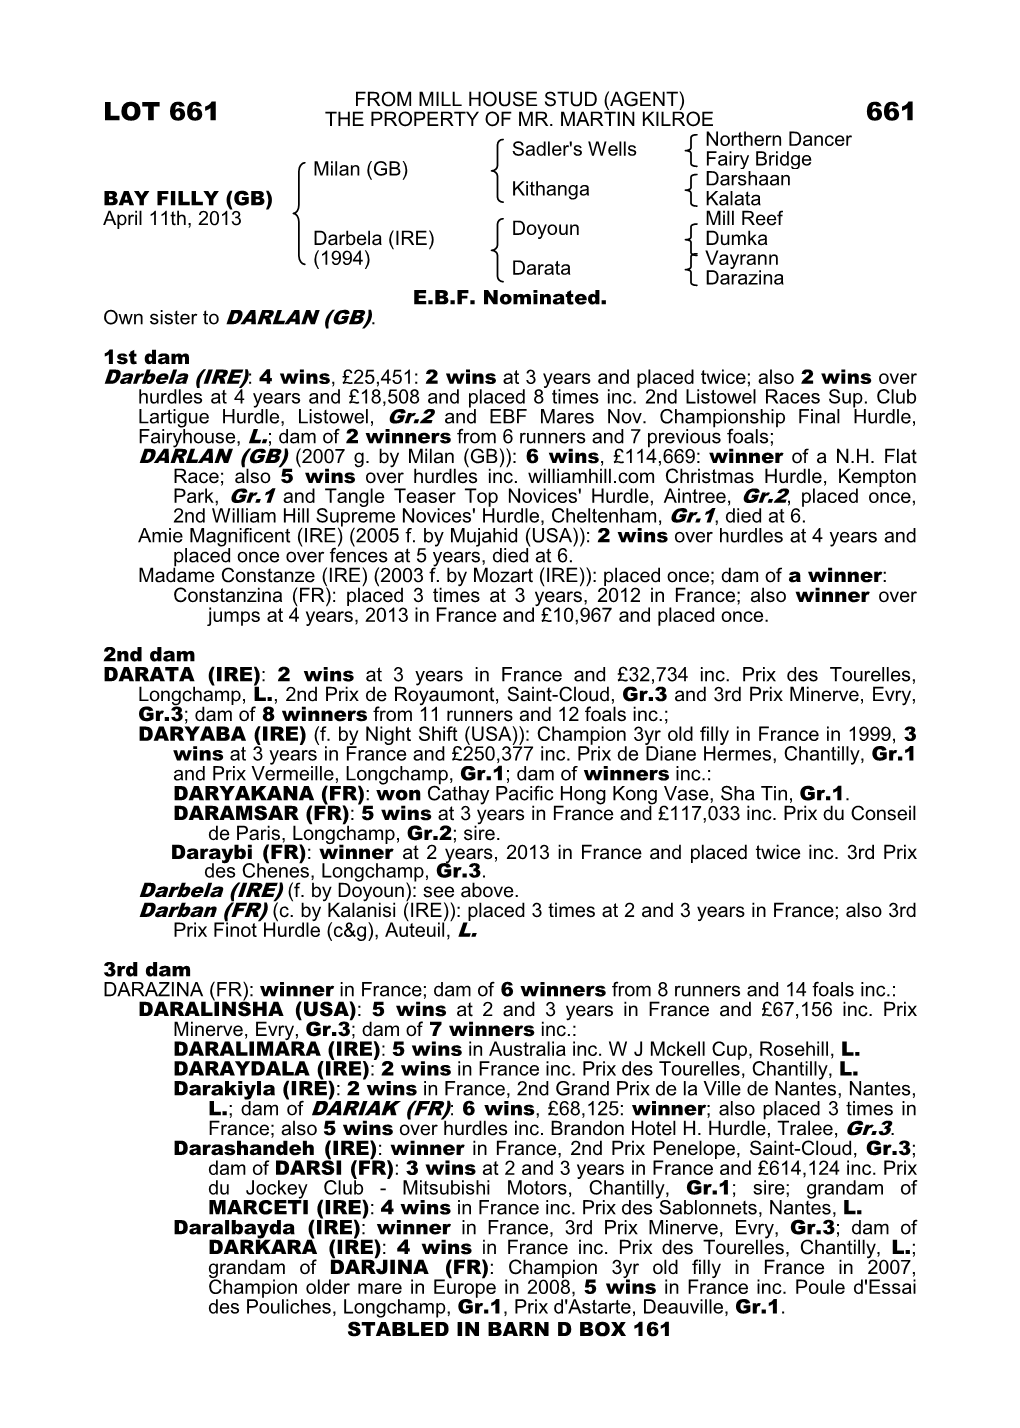 Lot 661 the Property of Mr